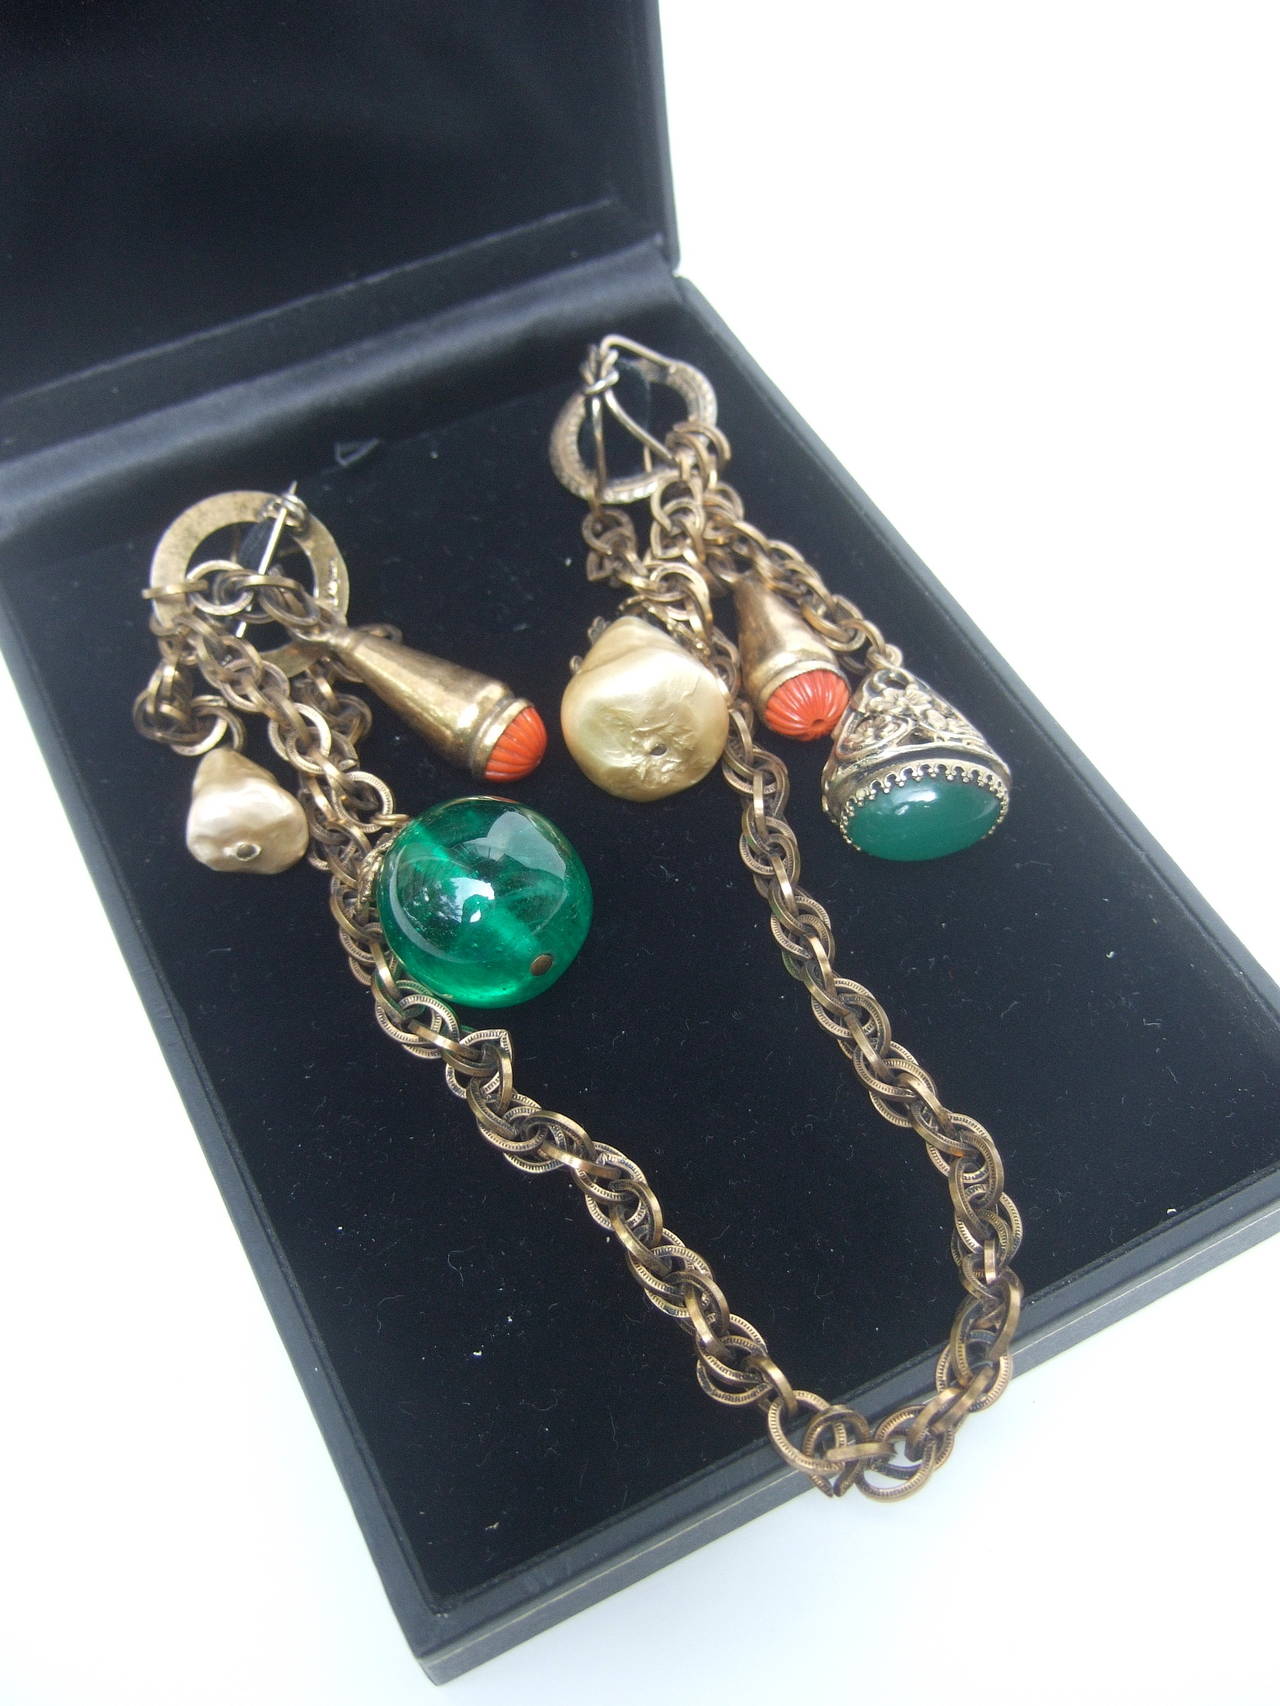 Adele Simpson Jeweled Glass Bauble Chatelaine Brooch c 1950 For Sale 2